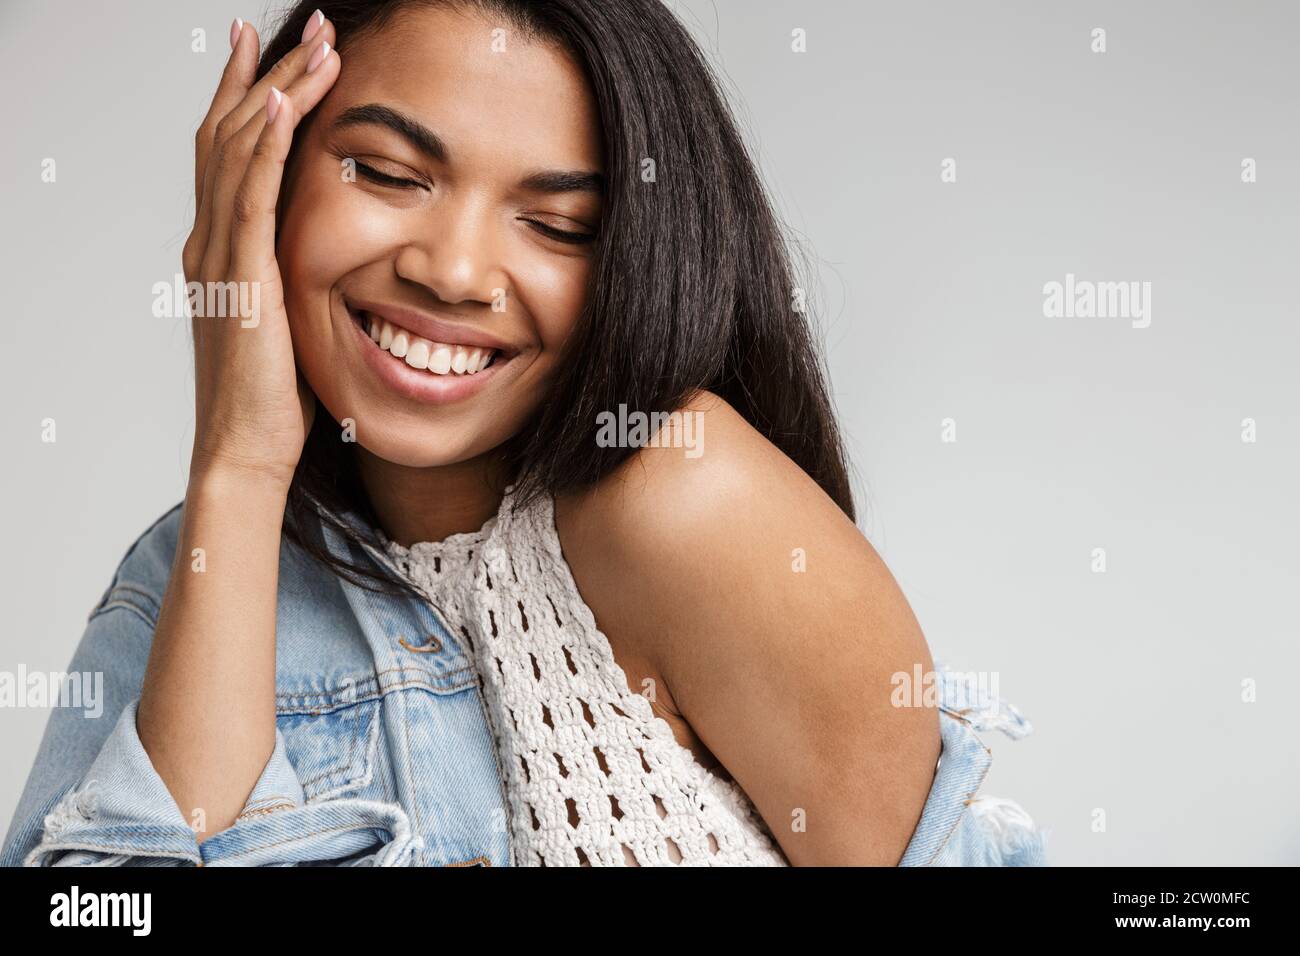 Portrait of a happy smiling young african woman with long dark hair wearing casual clothes standing isolated over gray background Stock Photo